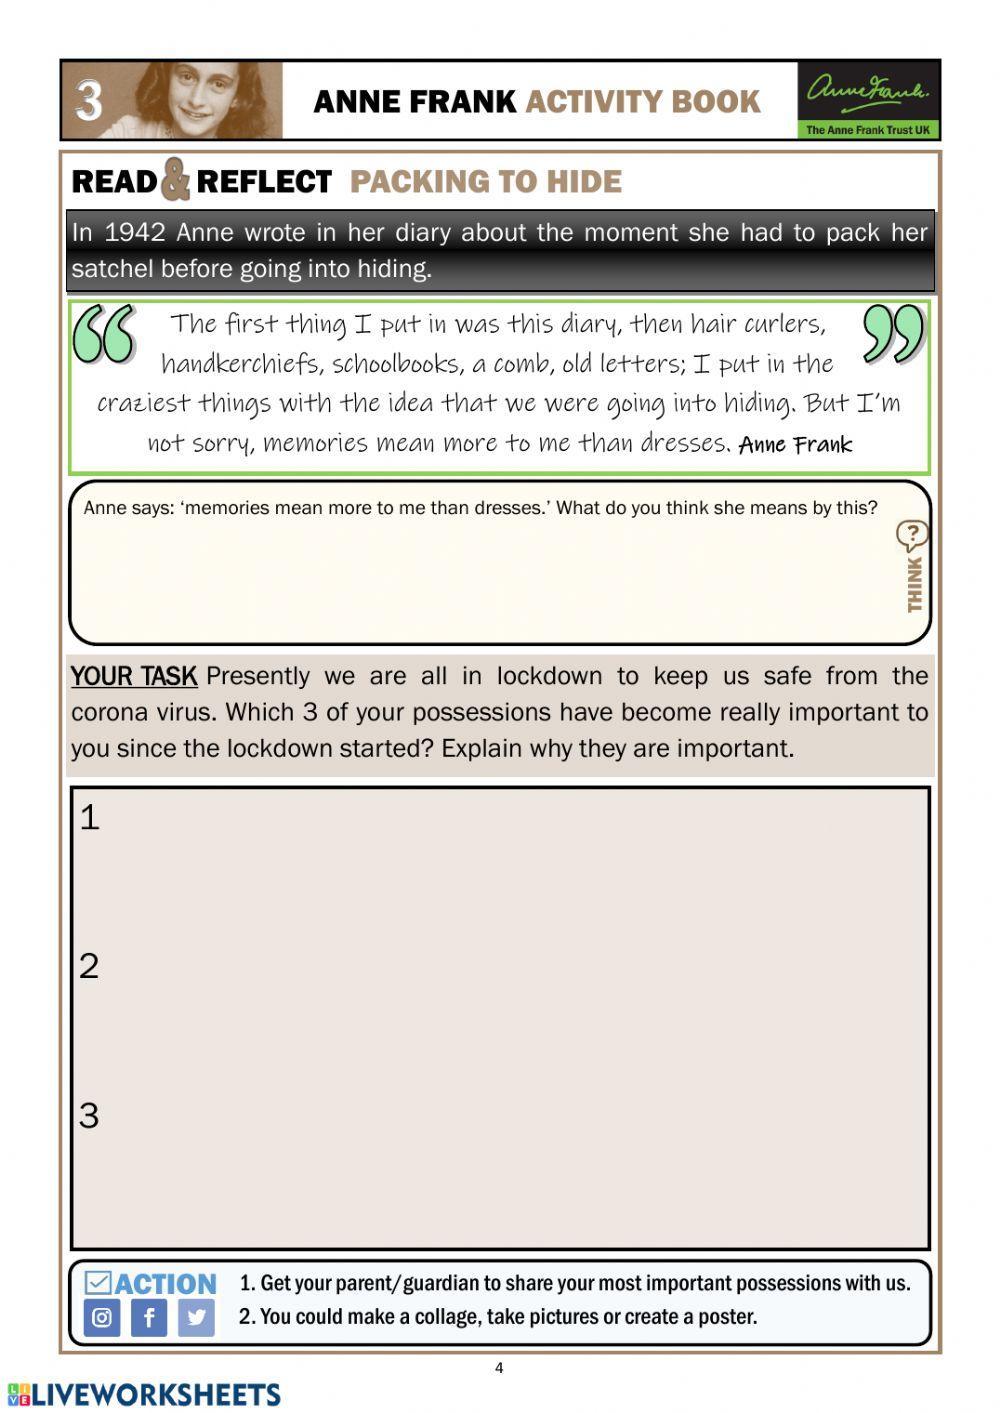 Anne Frank - Activity Book Section 3